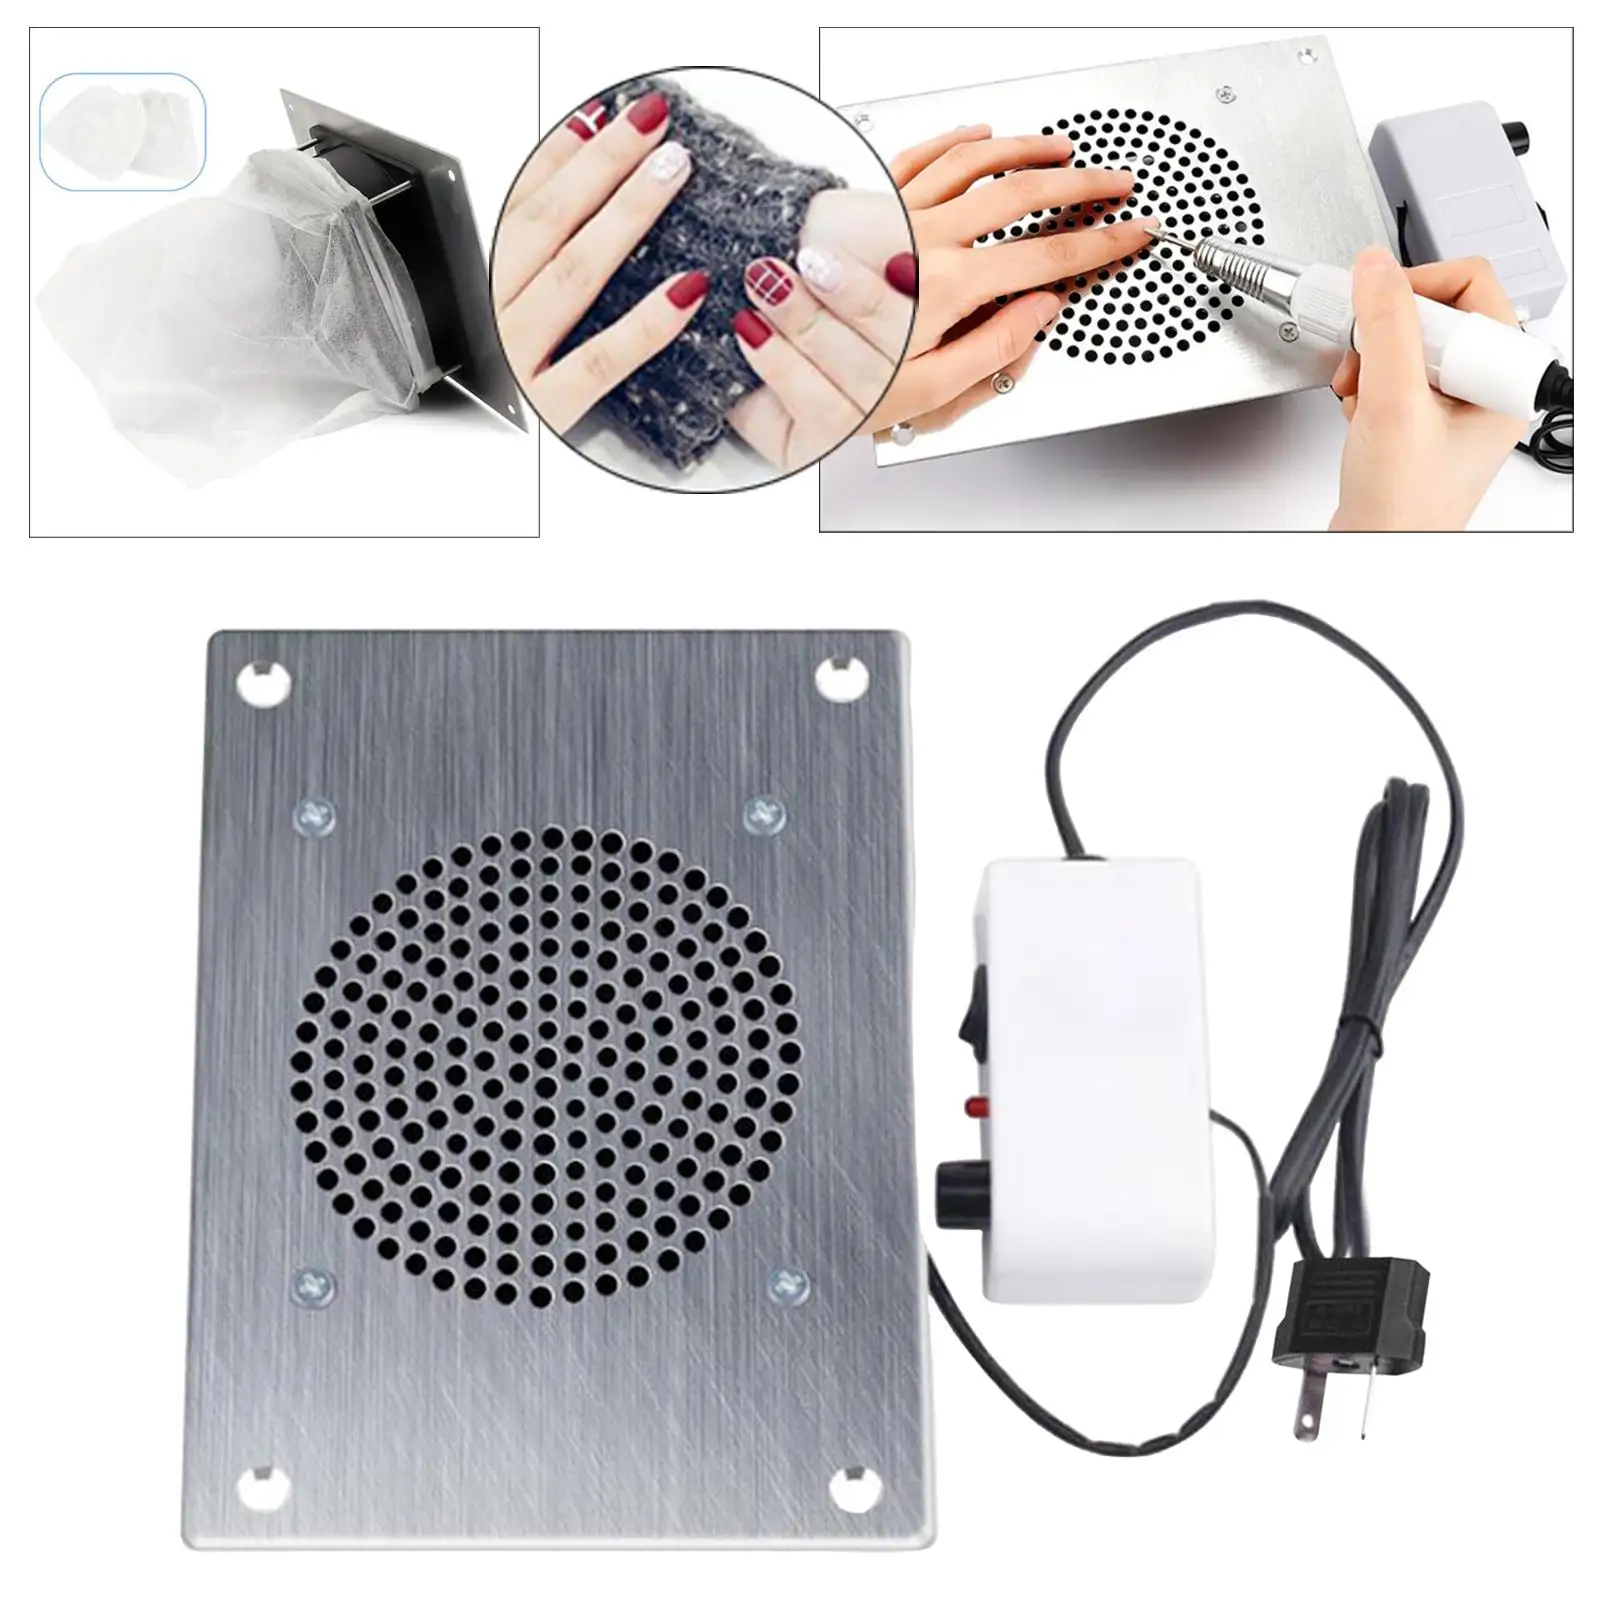 Desk Nail Dust Collector Nail Extractor Fan for Manicure Tools Equipment Nail Art Vacuum Cleaner with Collecting Bag